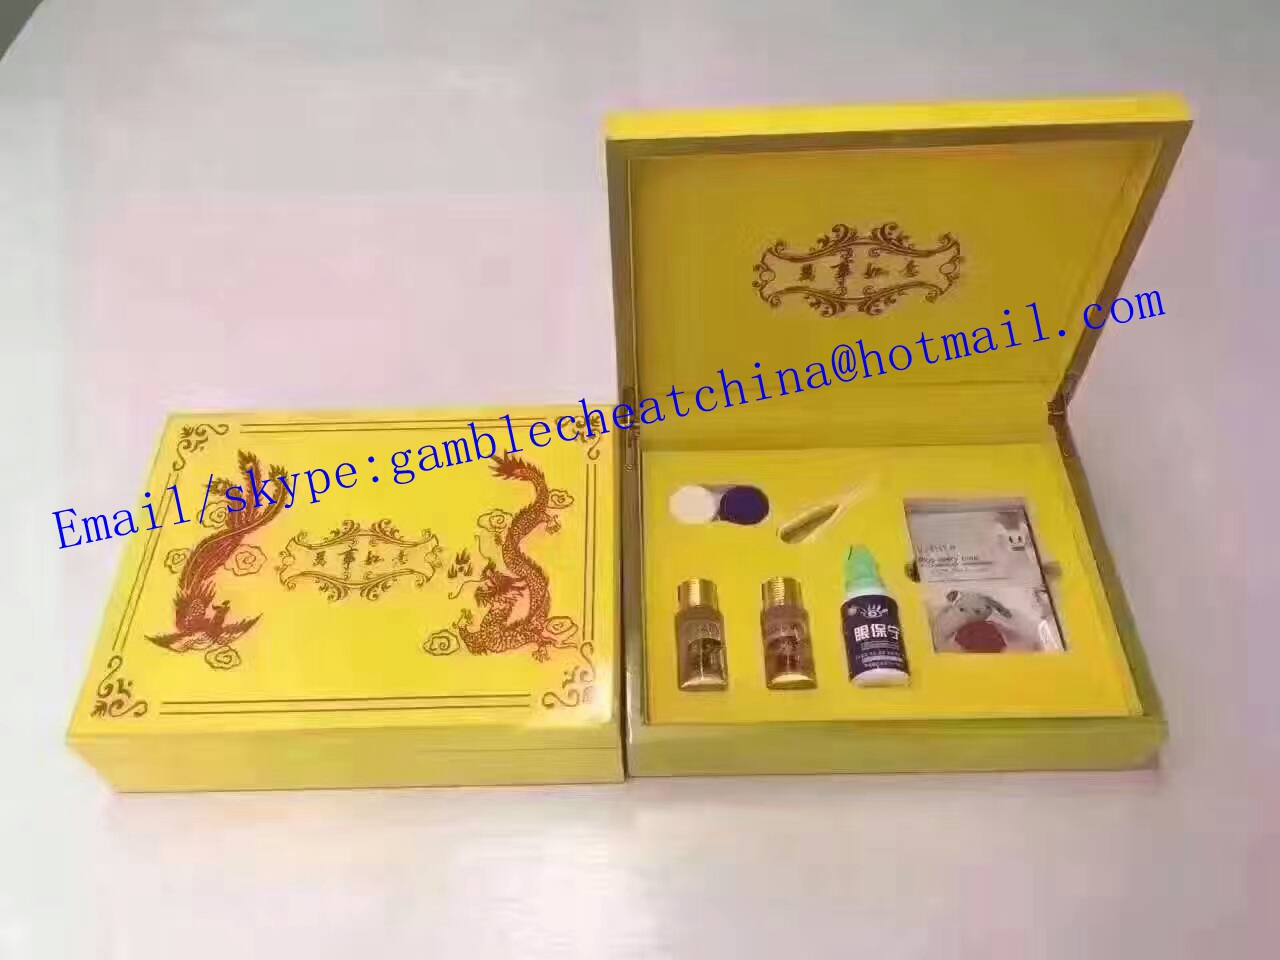 2018 Grade A uv contact lenses for gamble cheat/invisible ink/cards cheat/luminous marked cards/magic trick